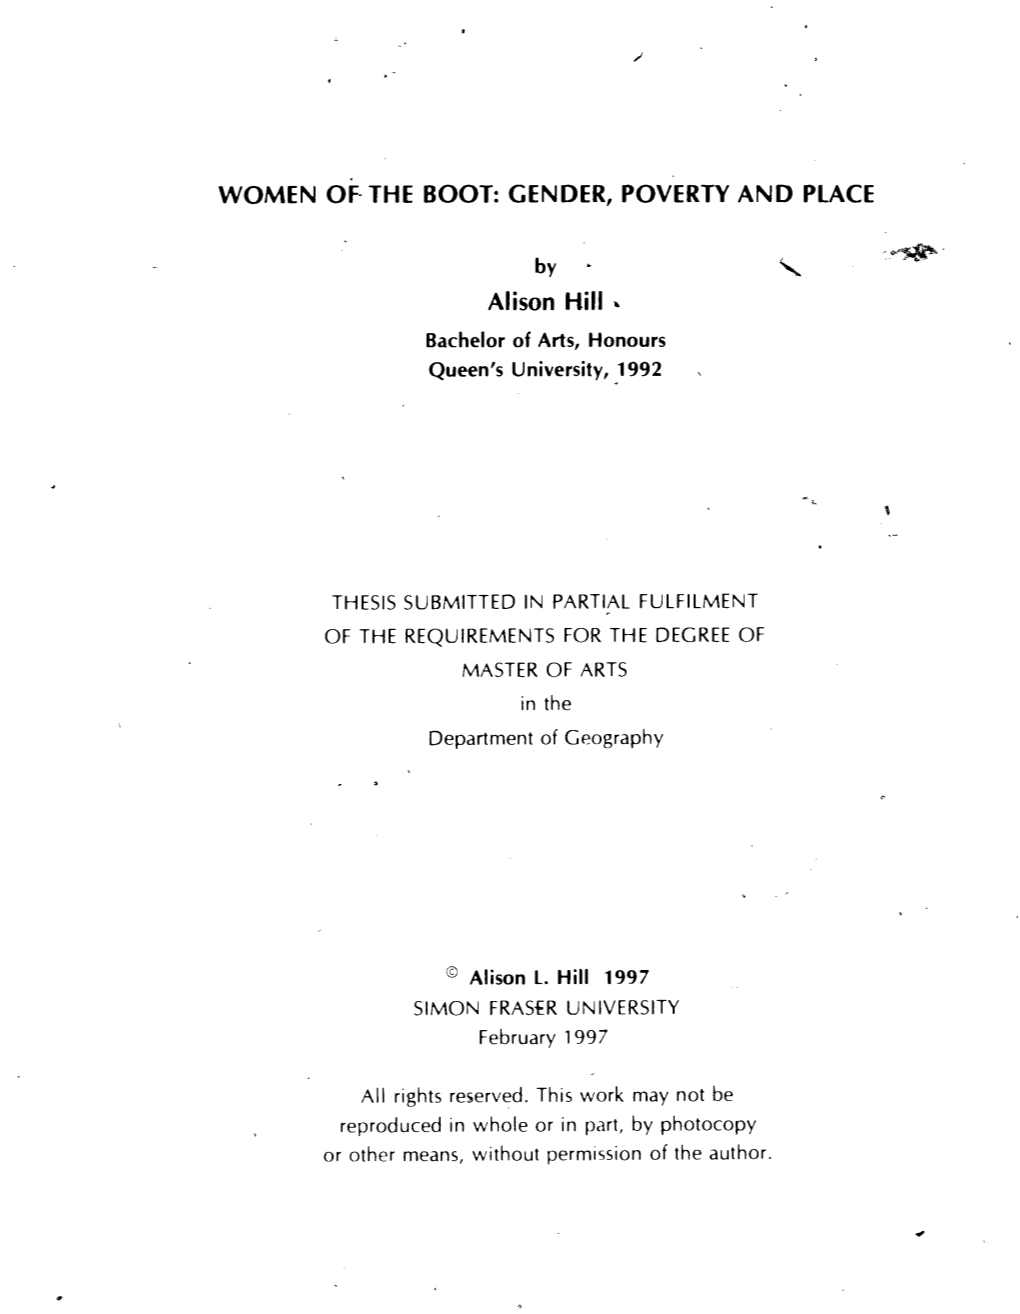 Gender, Poverty and Place